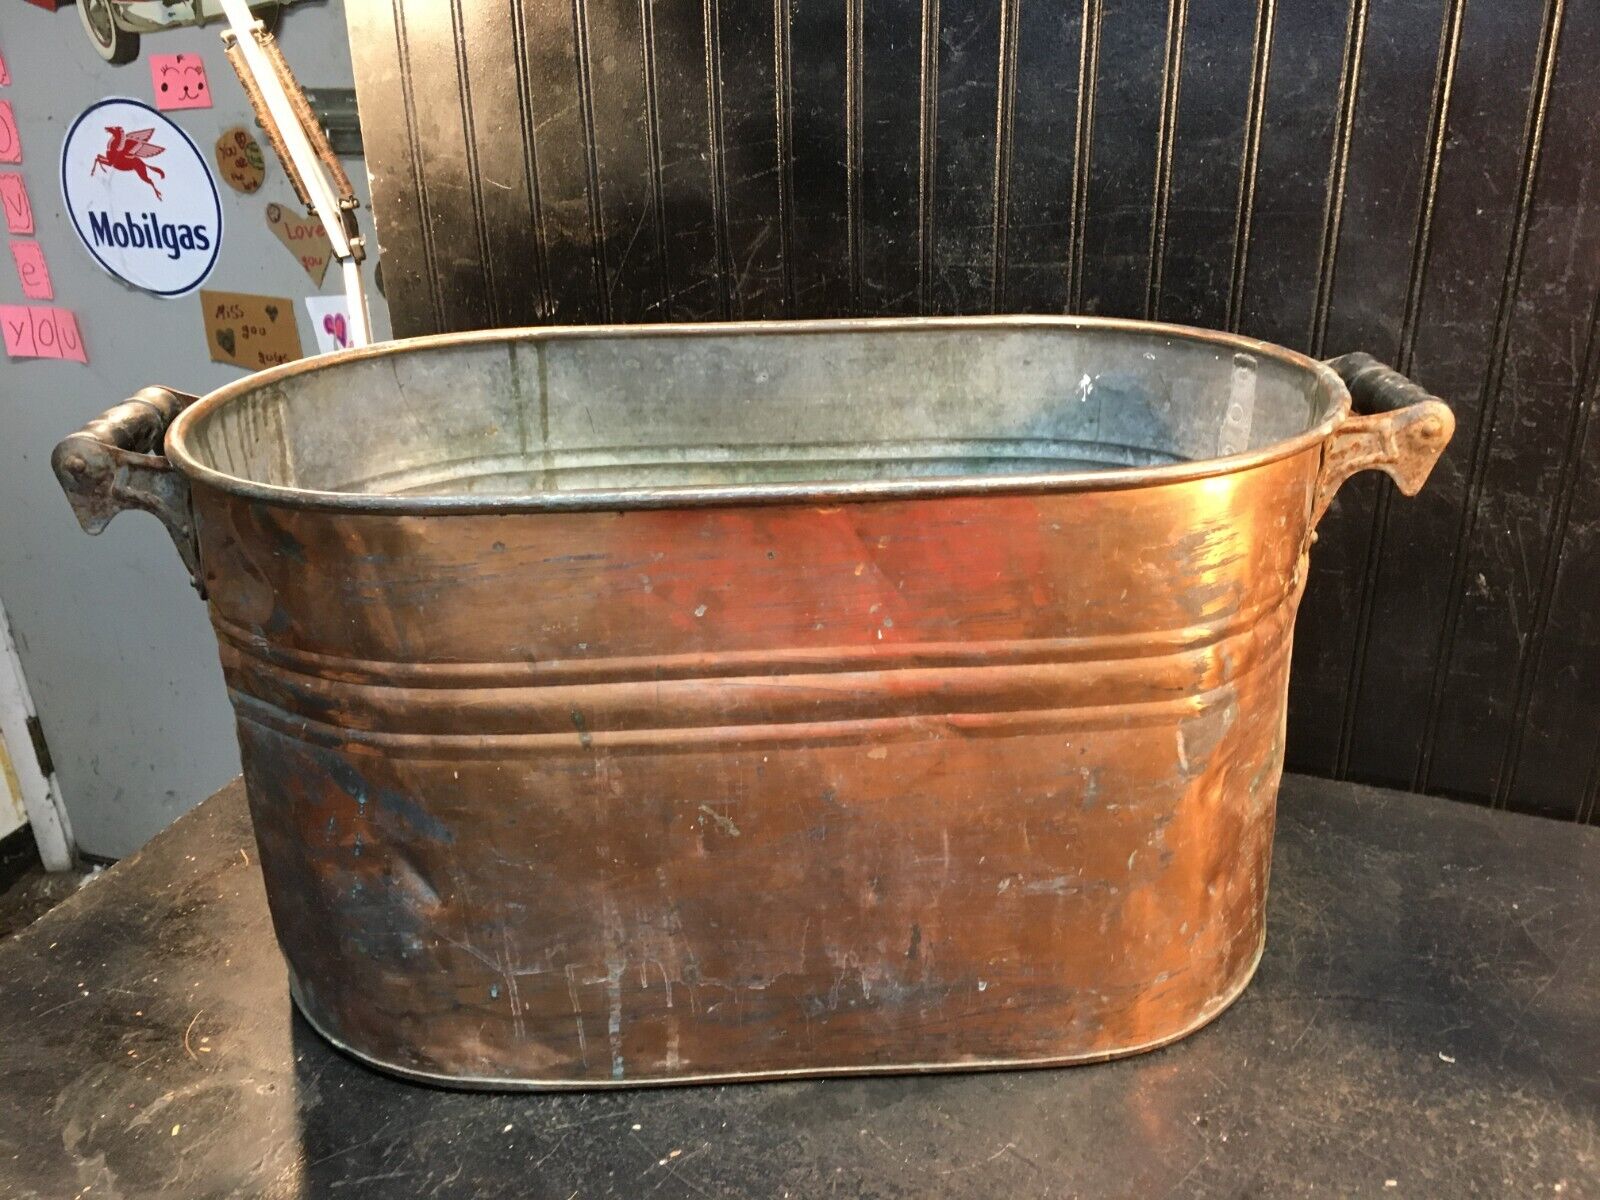 Vintage Large Oval Copper Boiler Wash Tub with Wood Handles REEVES USA